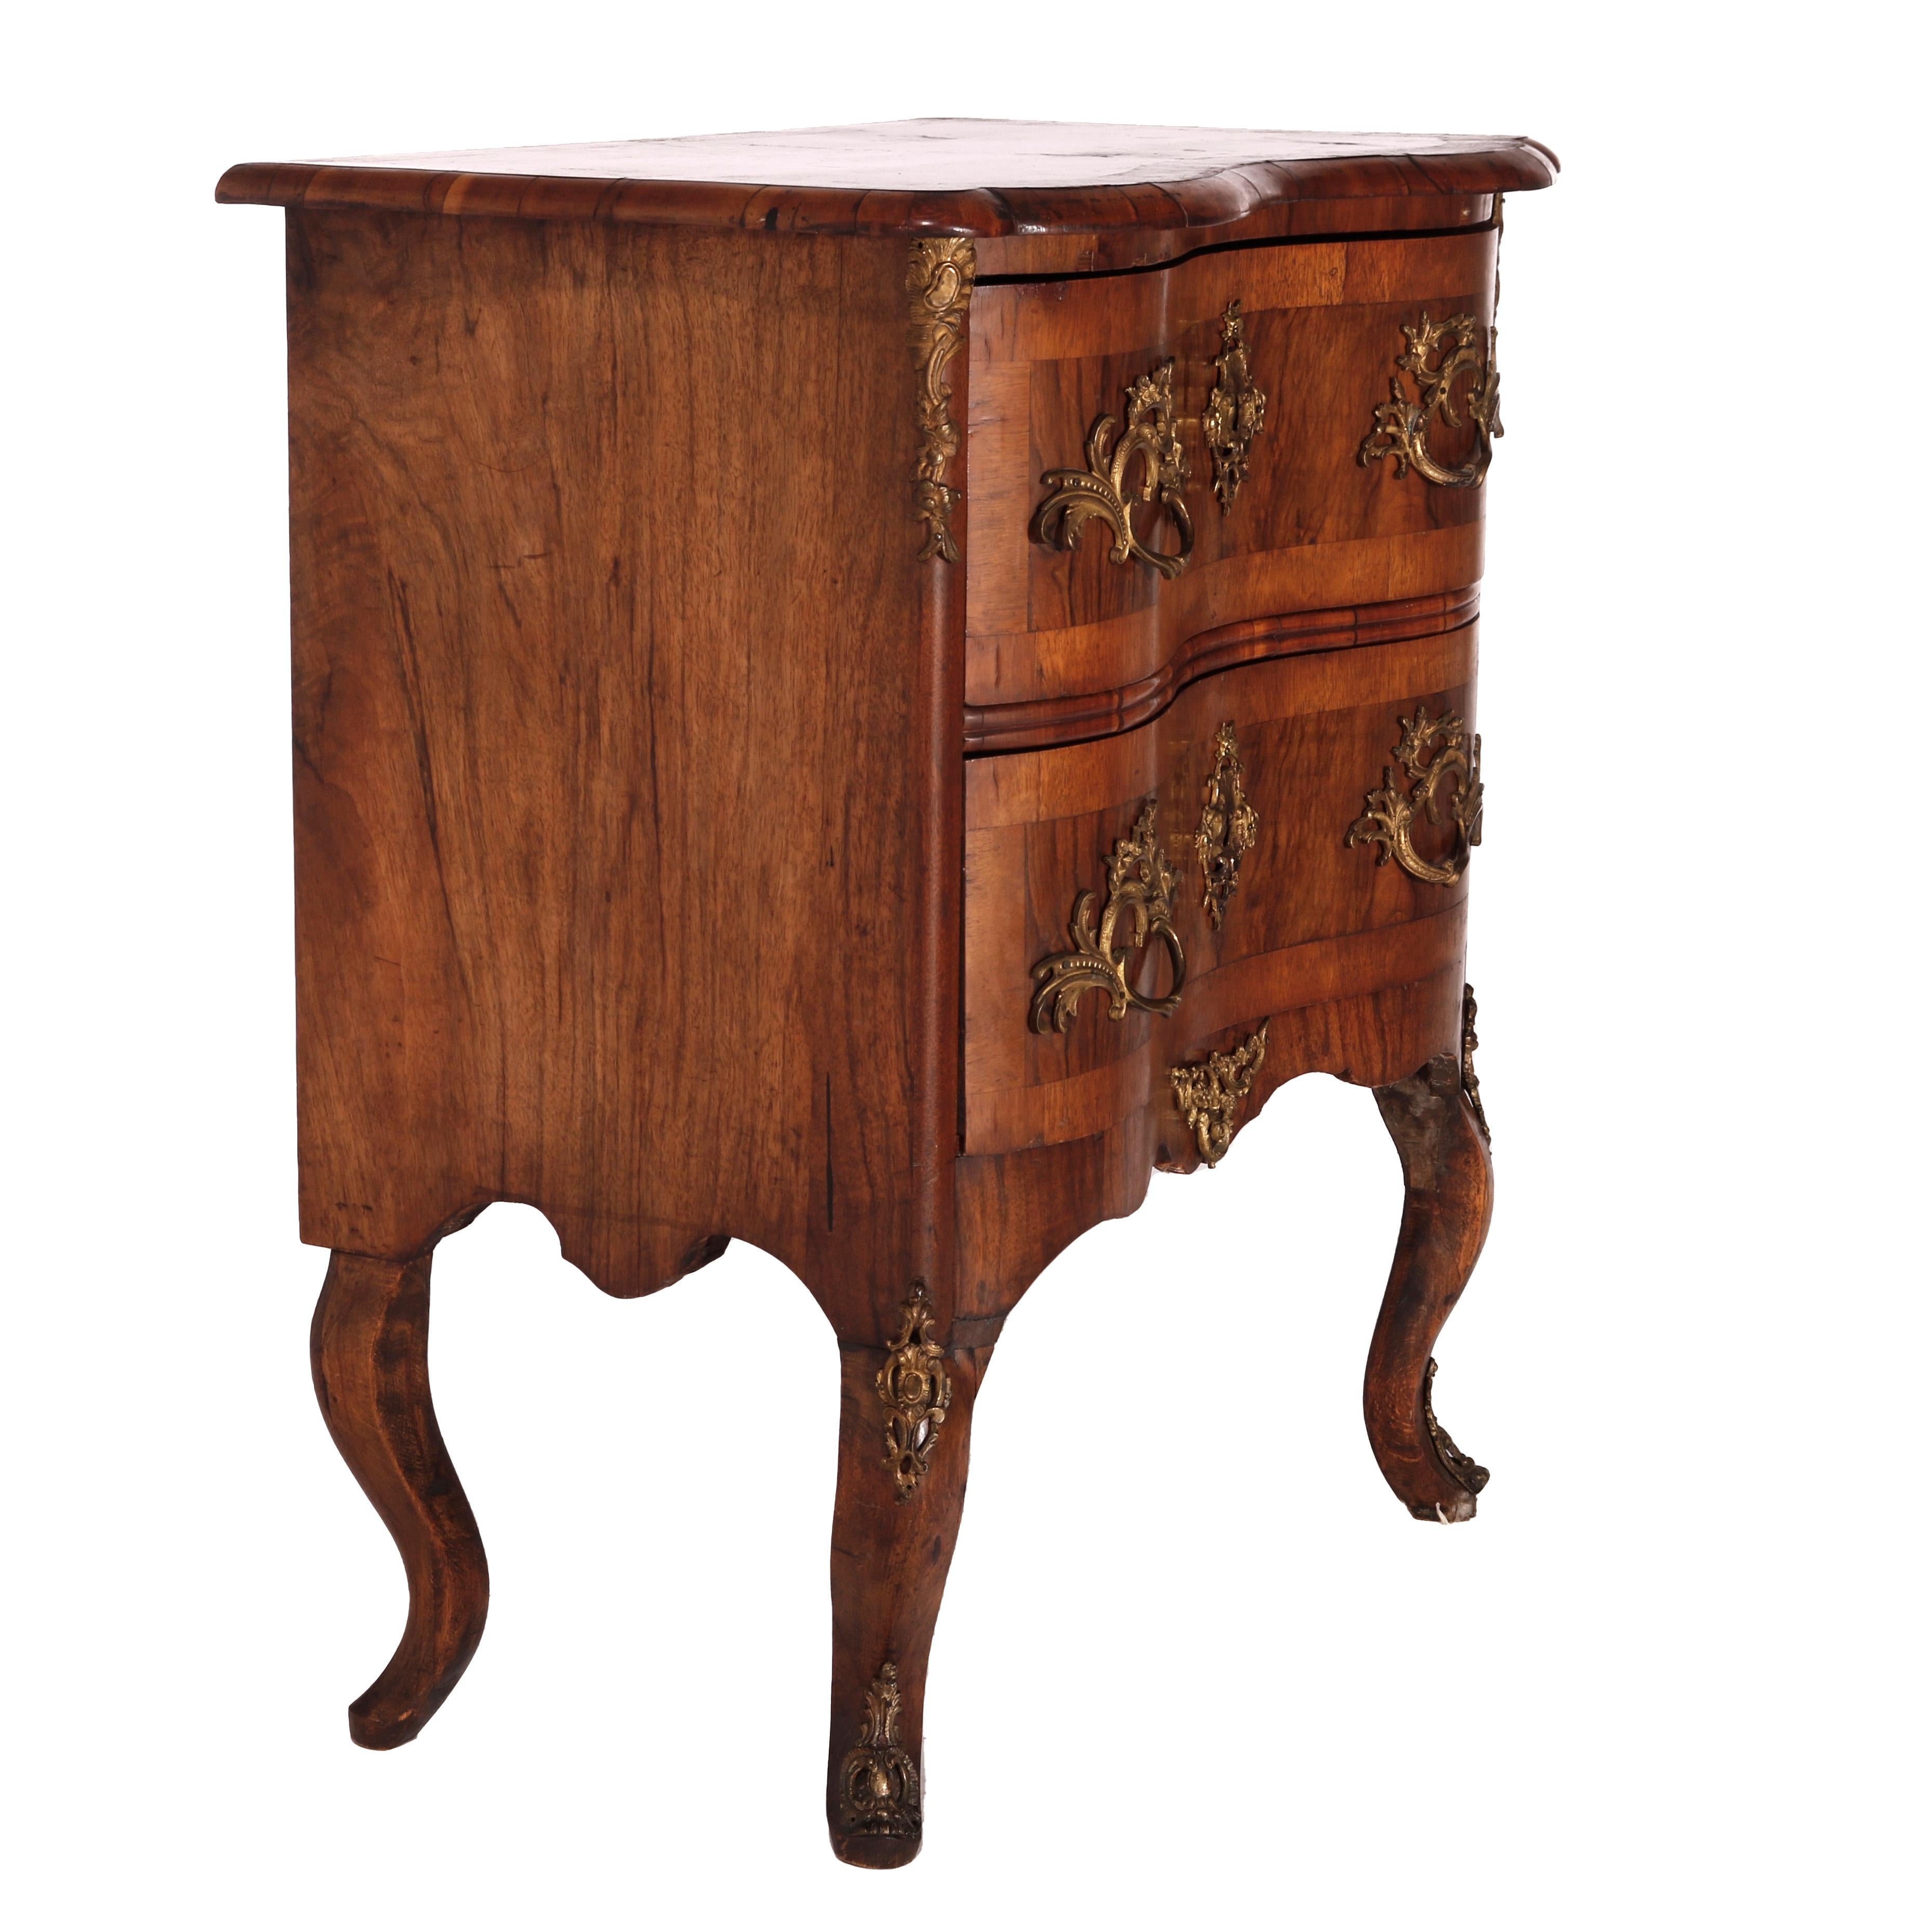  Antique Italian Kingwood, Satinwood & Burl Chest with Ormolu Mounts Late 18th C For Sale 5